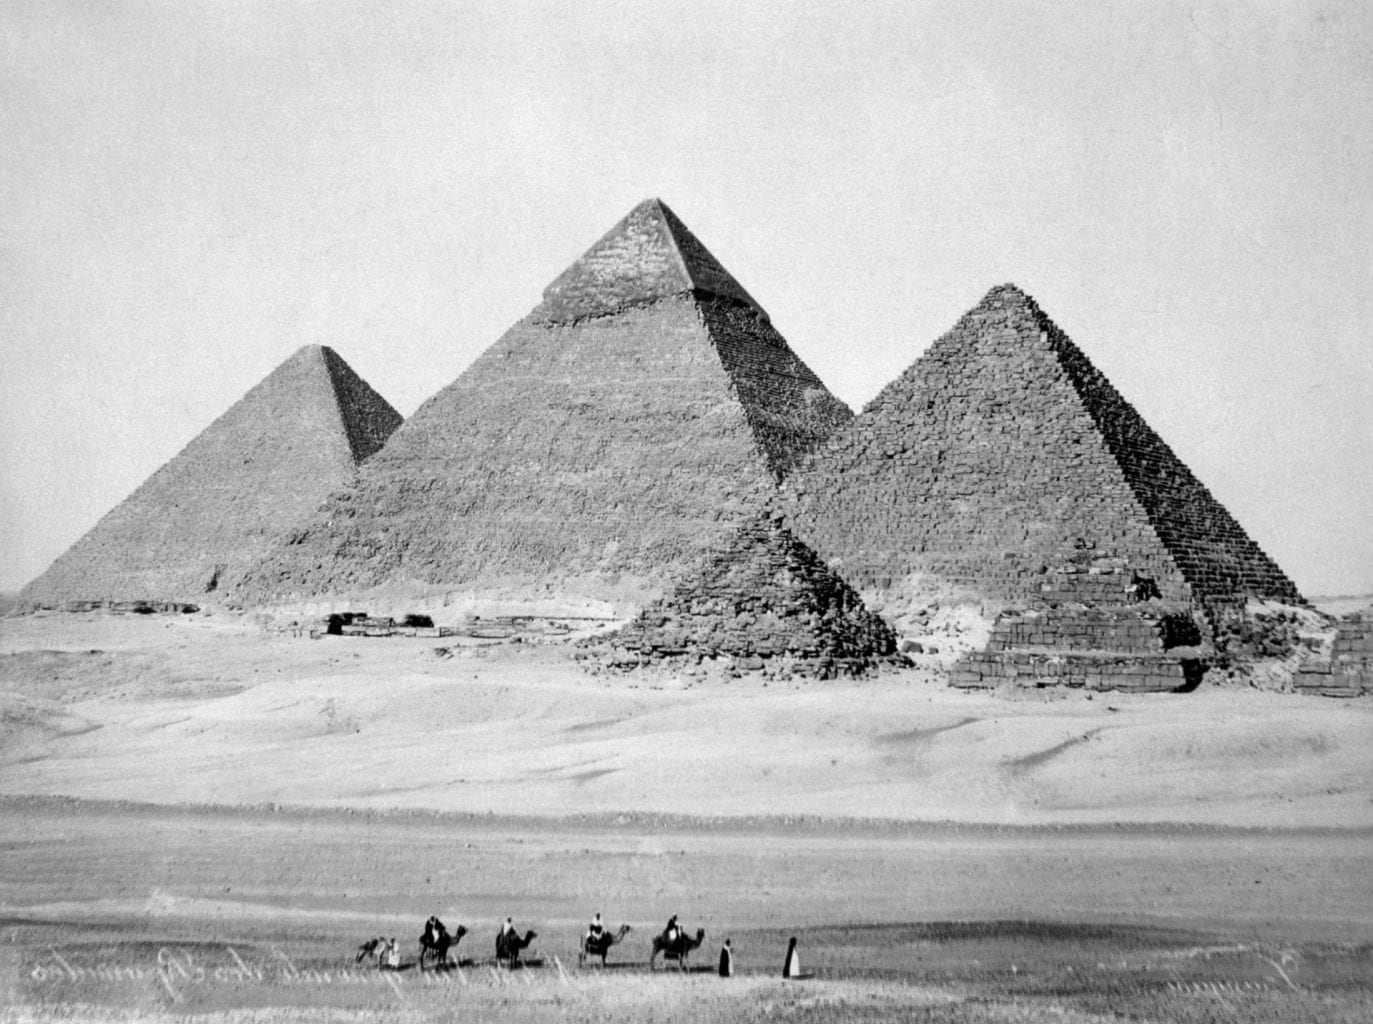 The Pyramids of Giza photographed in 1880. Credit: Shutterstock